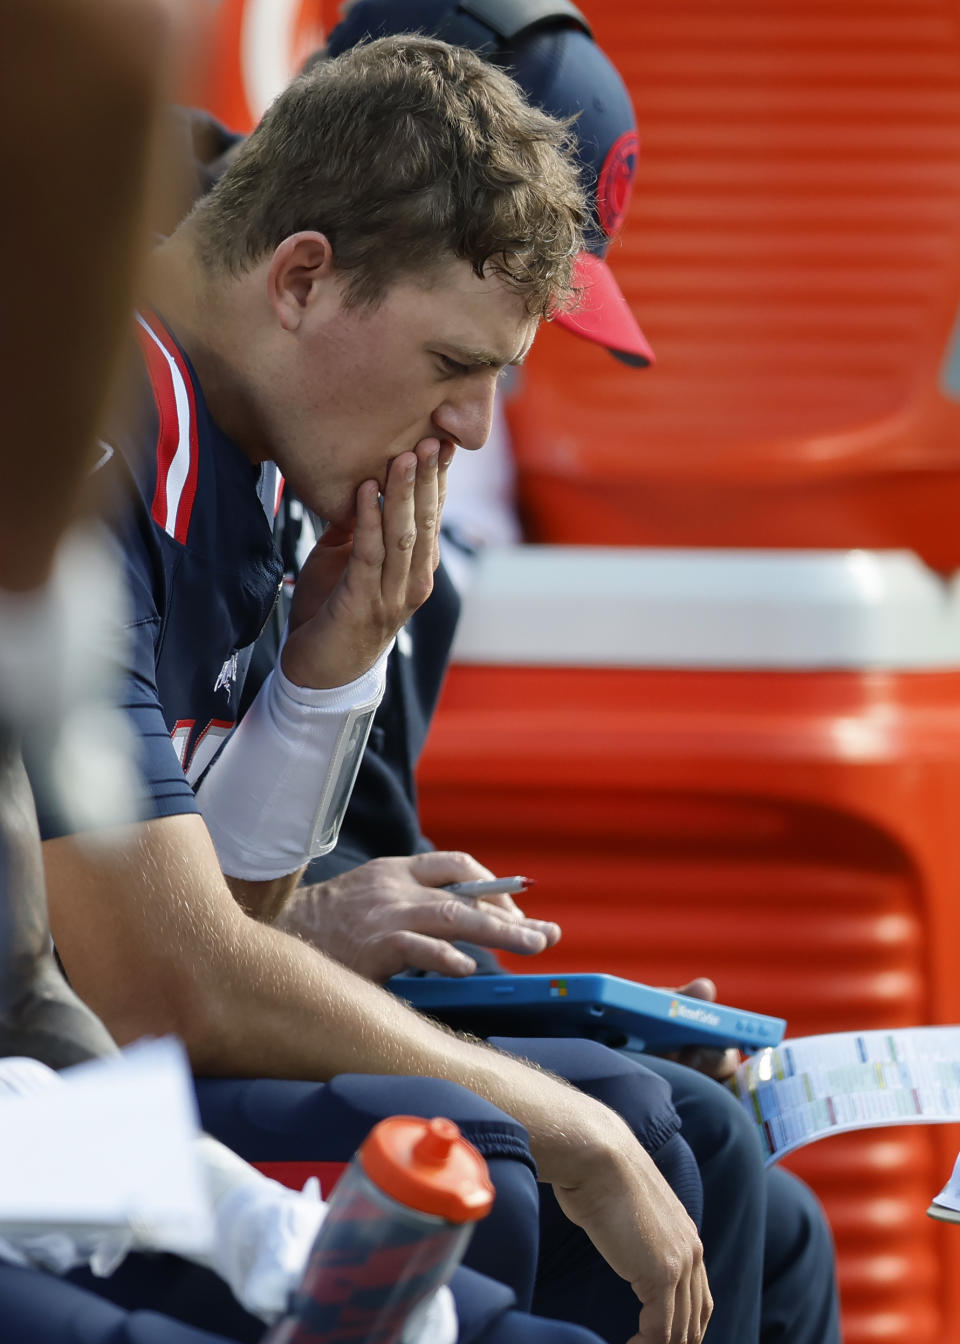 New England Patriots quarterback Mac Jones is seated on the bench during the first half of an NFL football game against the New Orleans Saints, Sunday, Oct. 8, 2023, in Foxborough, Mass. (AP Photo/Michael Dwyer)